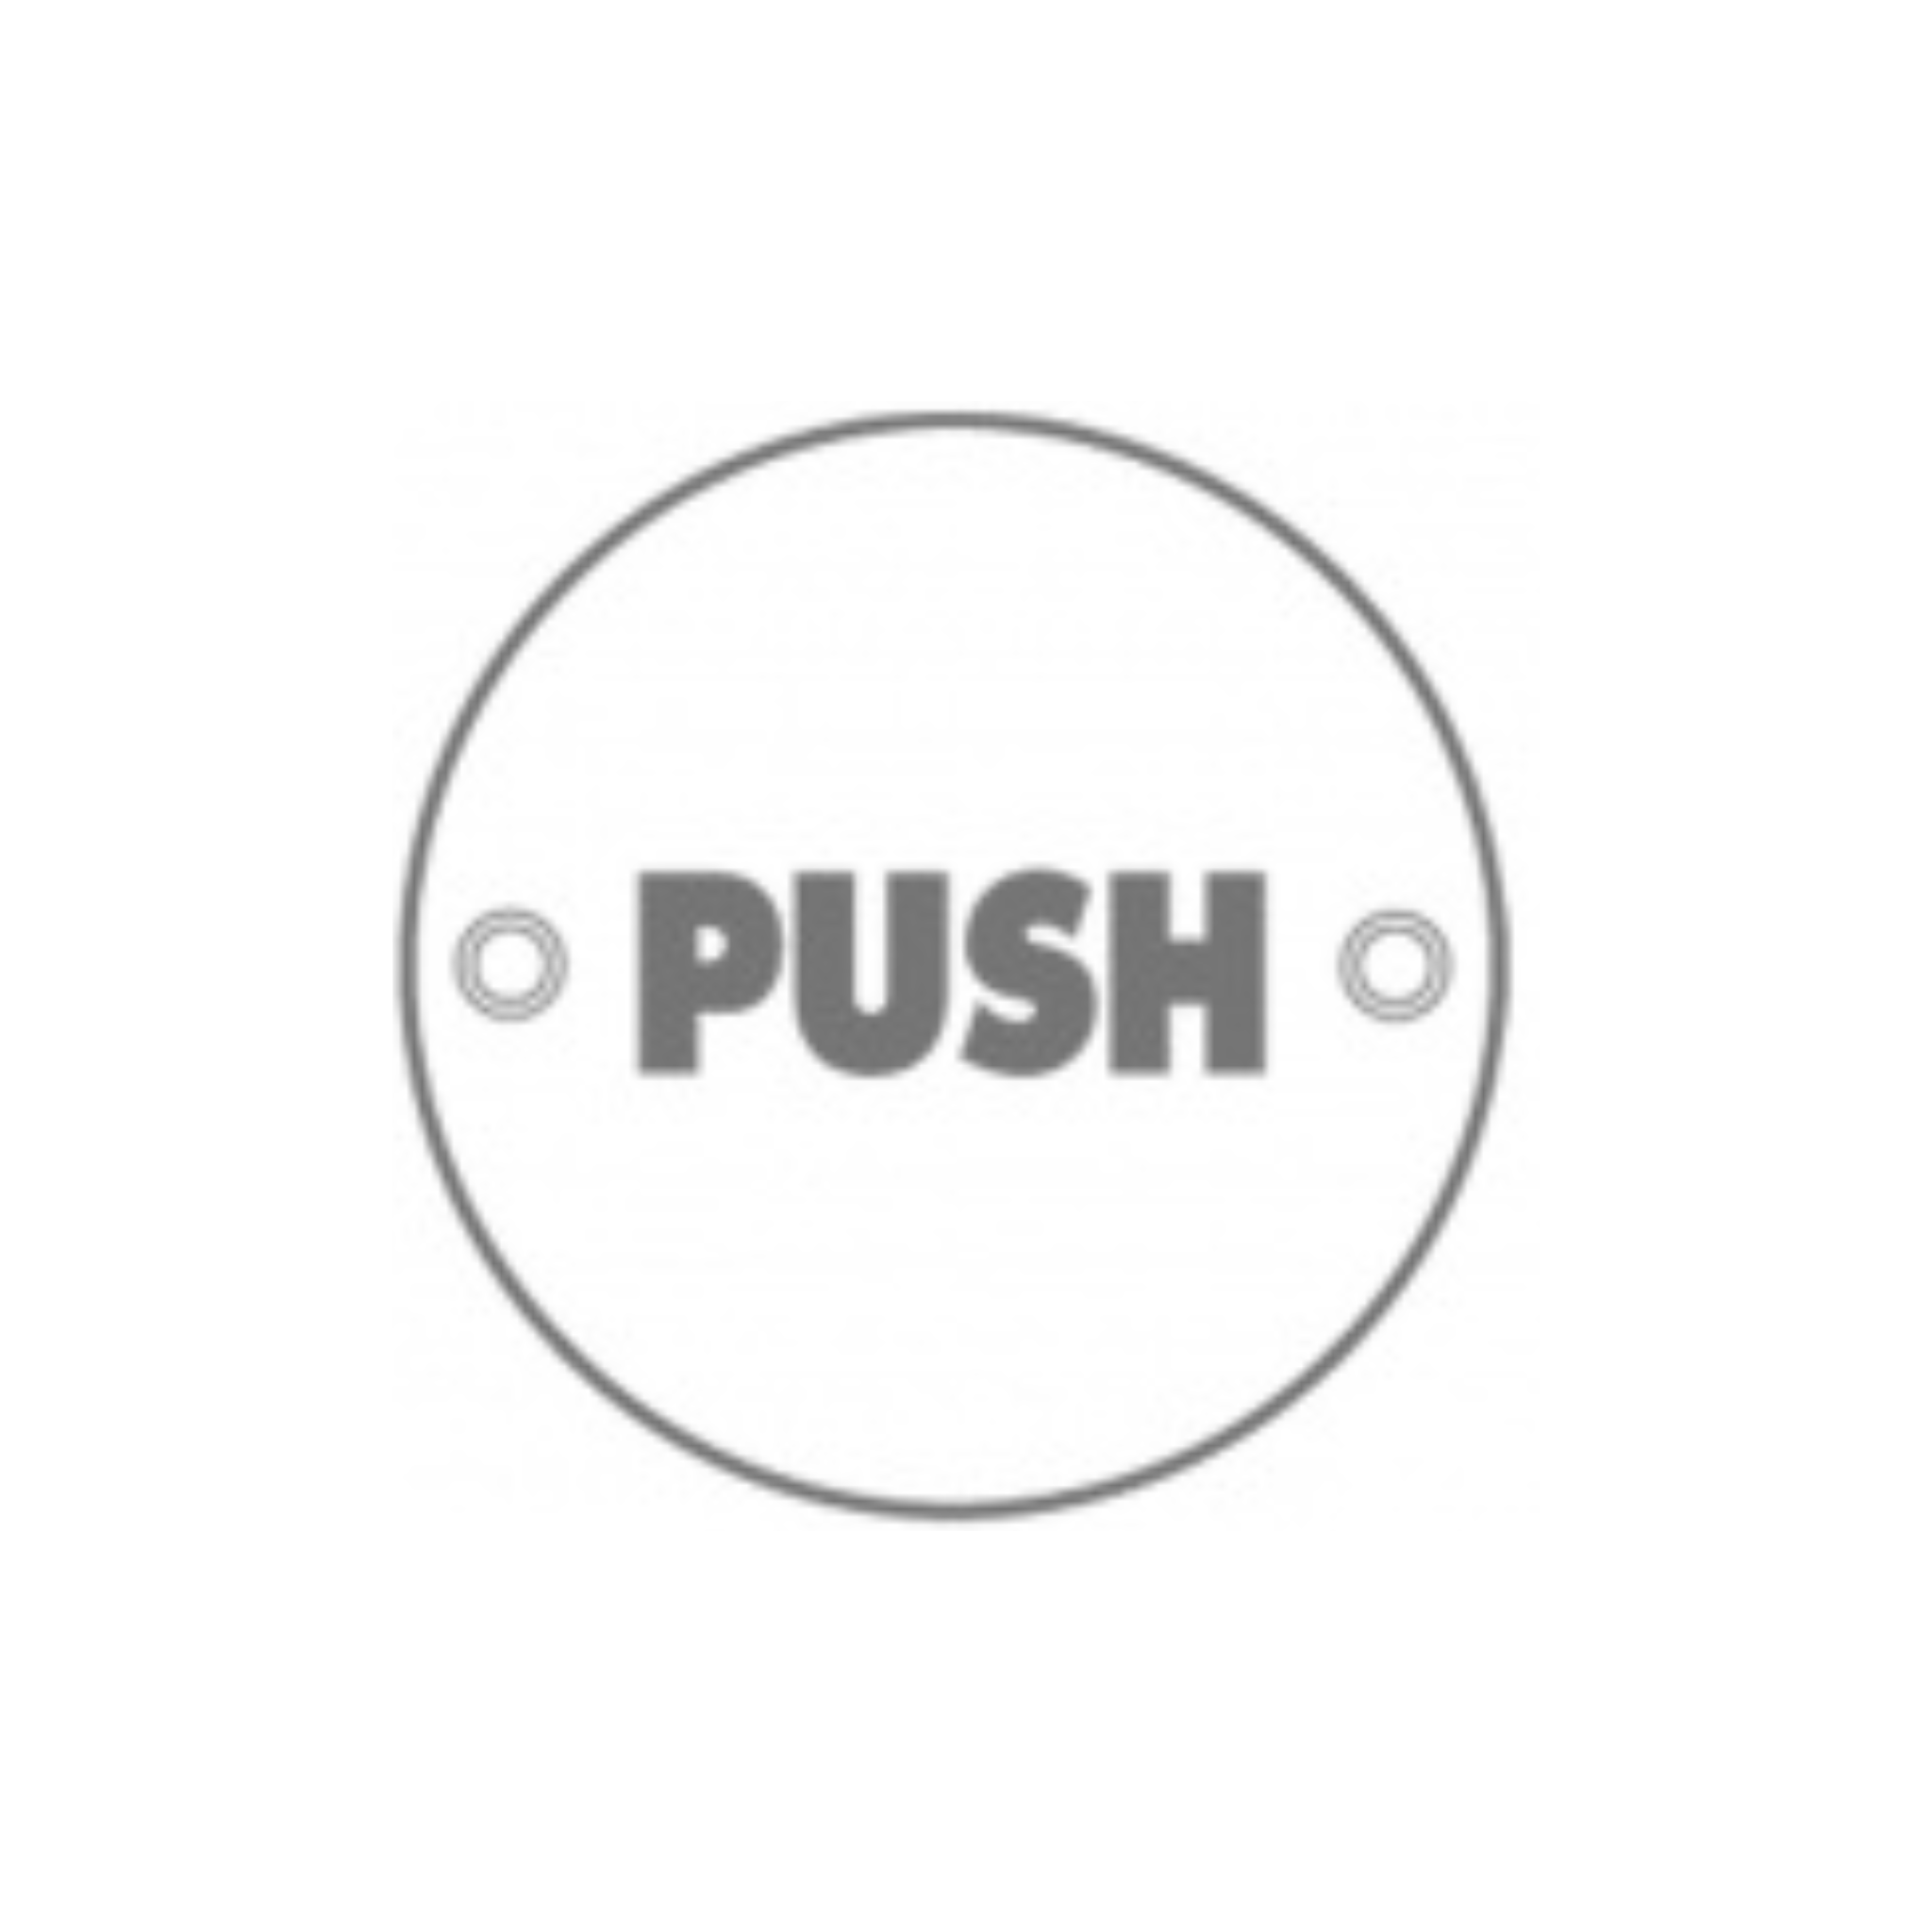 Push, Round Engraved Sign, 75mm, Stainless Steel, QS